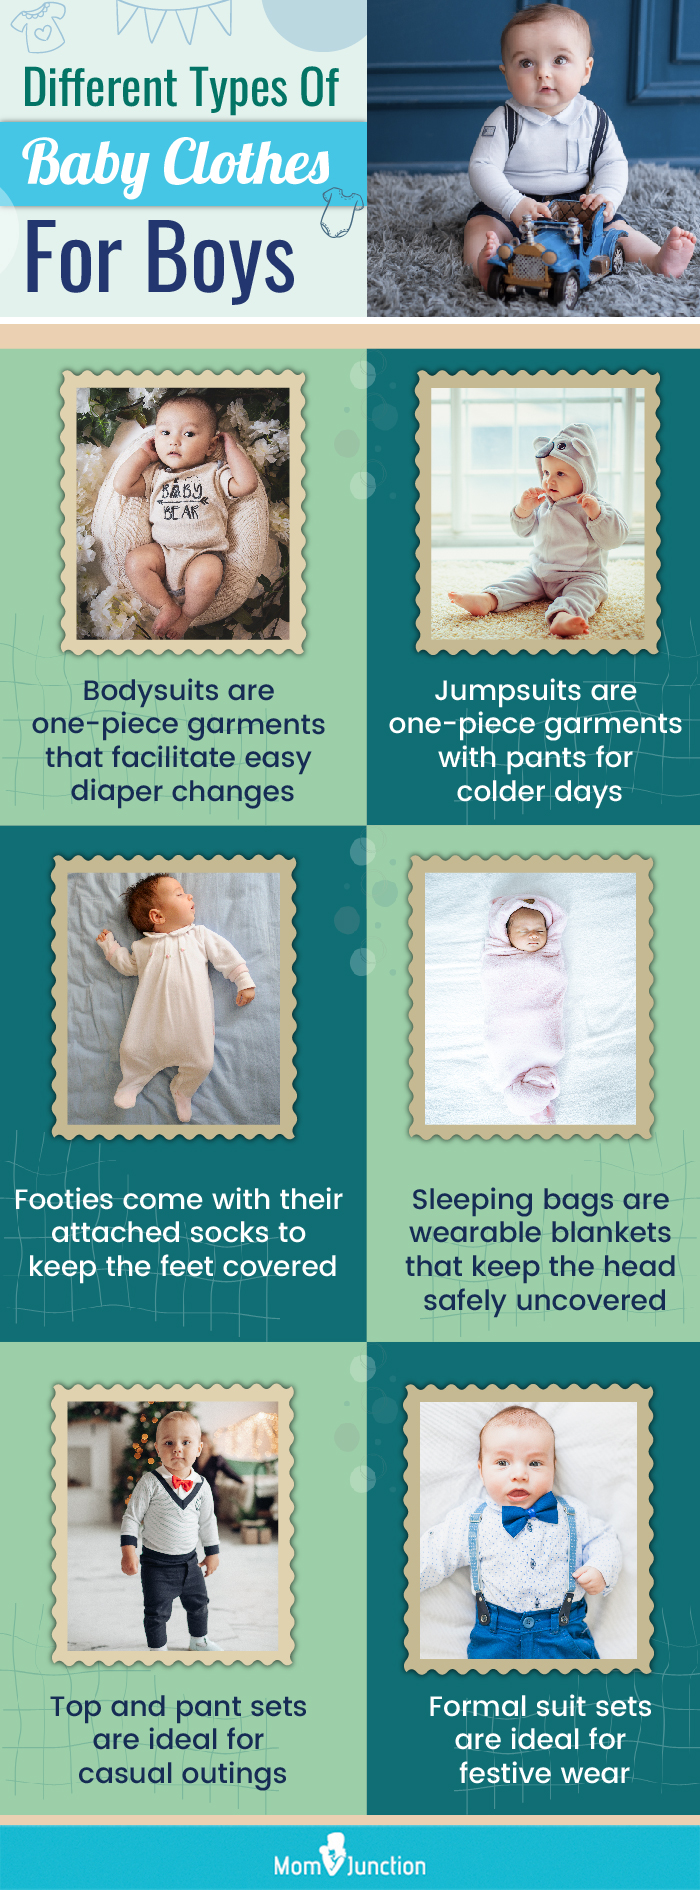 Different Types Of Baby Clothes For Boys (infographic)